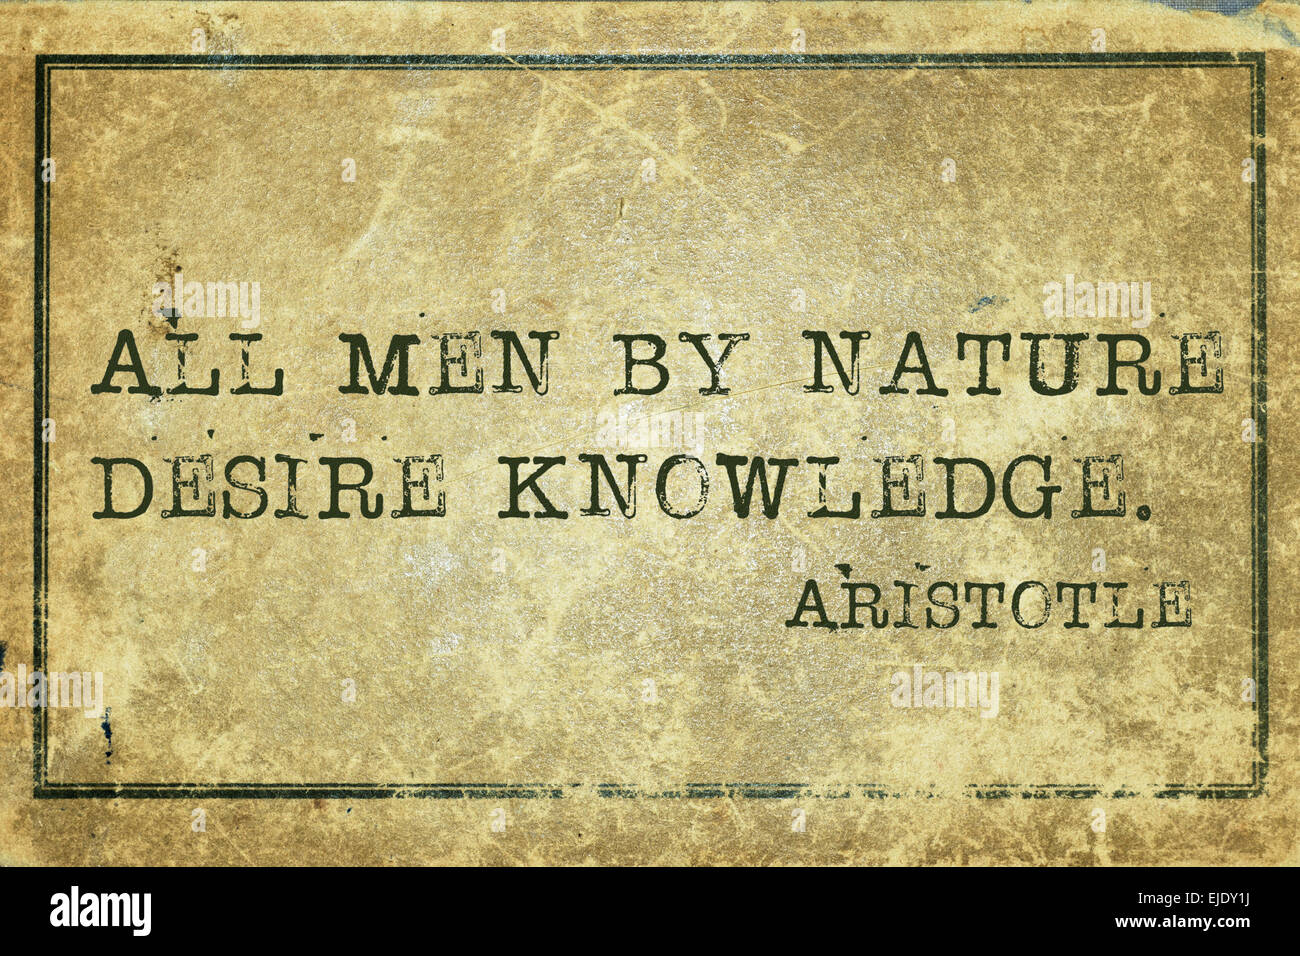 All men by nature desire knowledge - ancient Greek philosopher Aristotle  quote printed on grunge vintage cardboard Stock Photo - Alamy